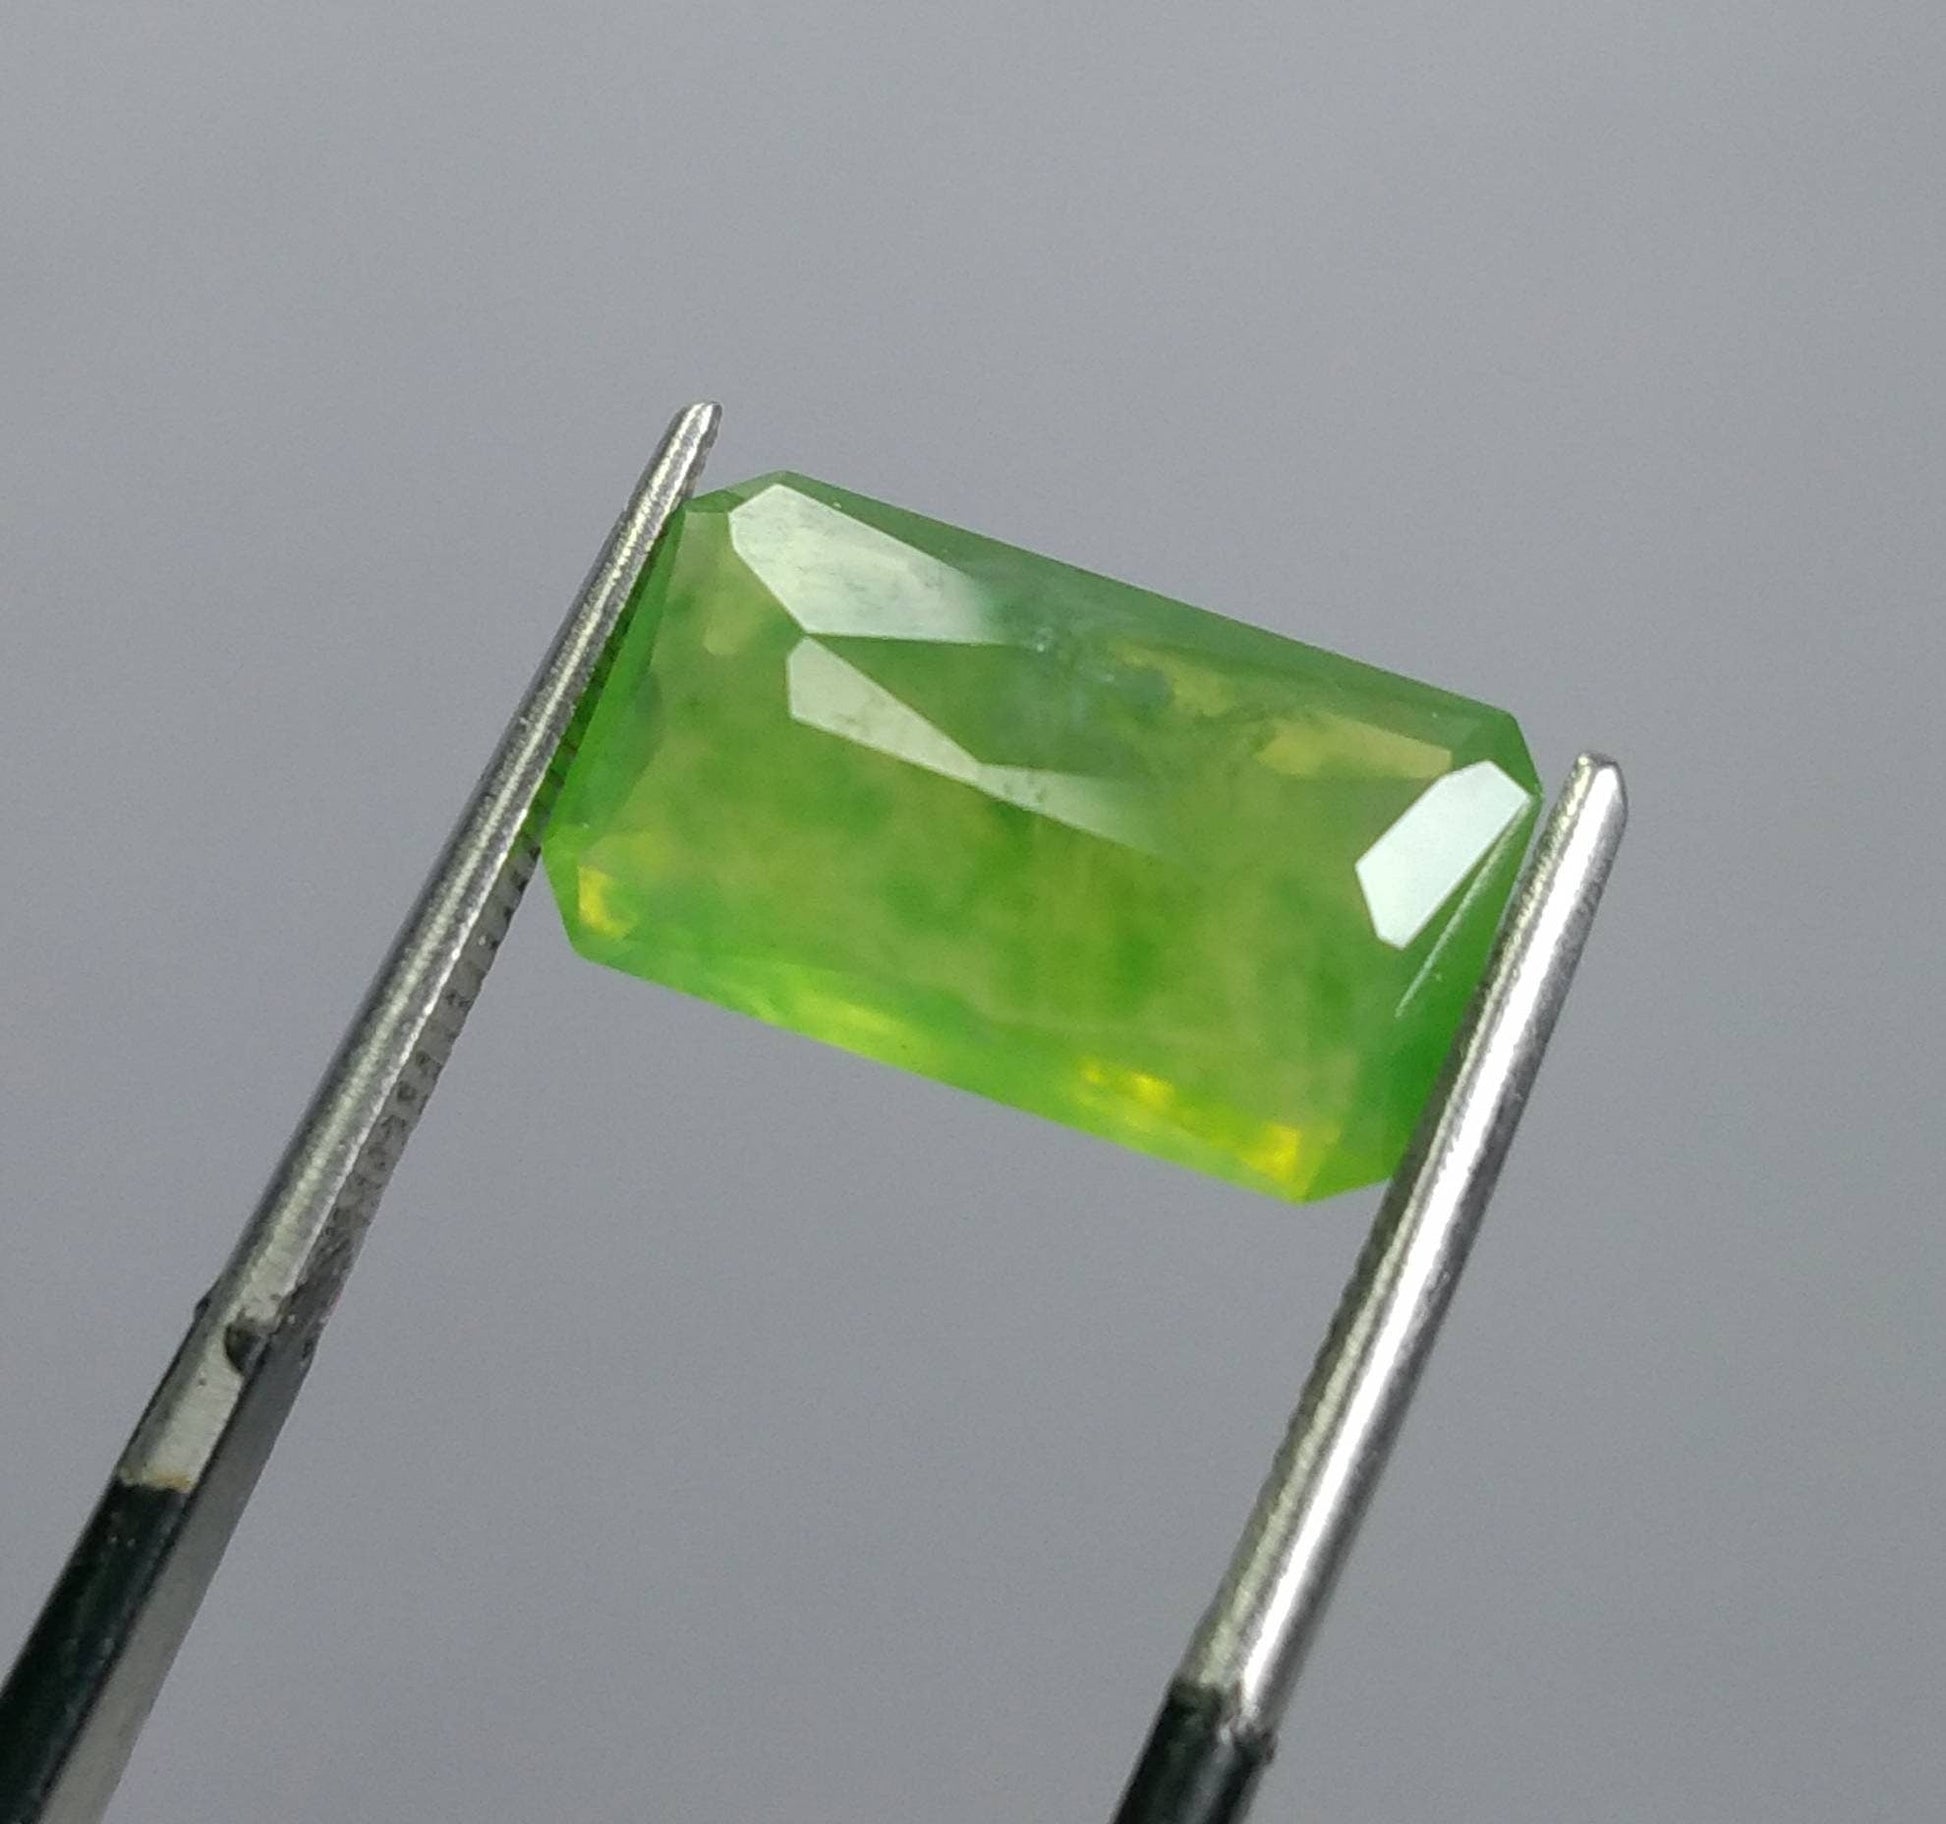 ARSAA GEMS AND MINERALSNatural fine quality beautiful 5 carats green radiant cut shape Faceted hydrograssular garnet gem - Premium  from ARSAA GEMS AND MINERALS - Just $15.00! Shop now at ARSAA GEMS AND MINERALS